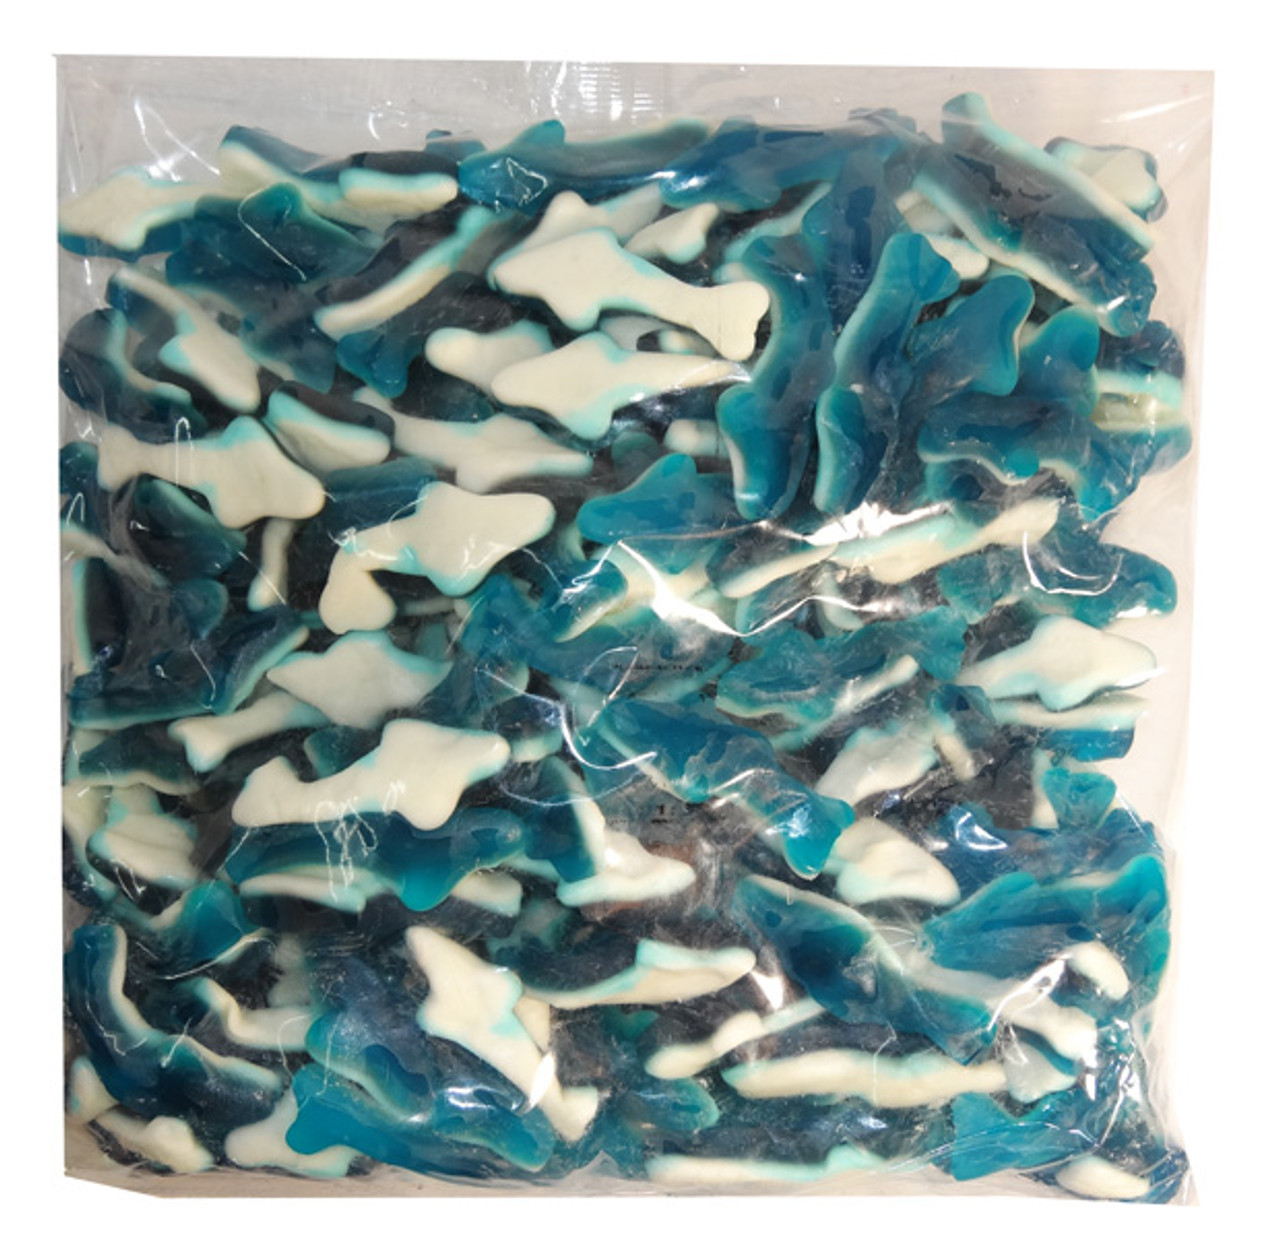 Gummy Blue Sharks, and other Confectionery at Australias cheapest ...